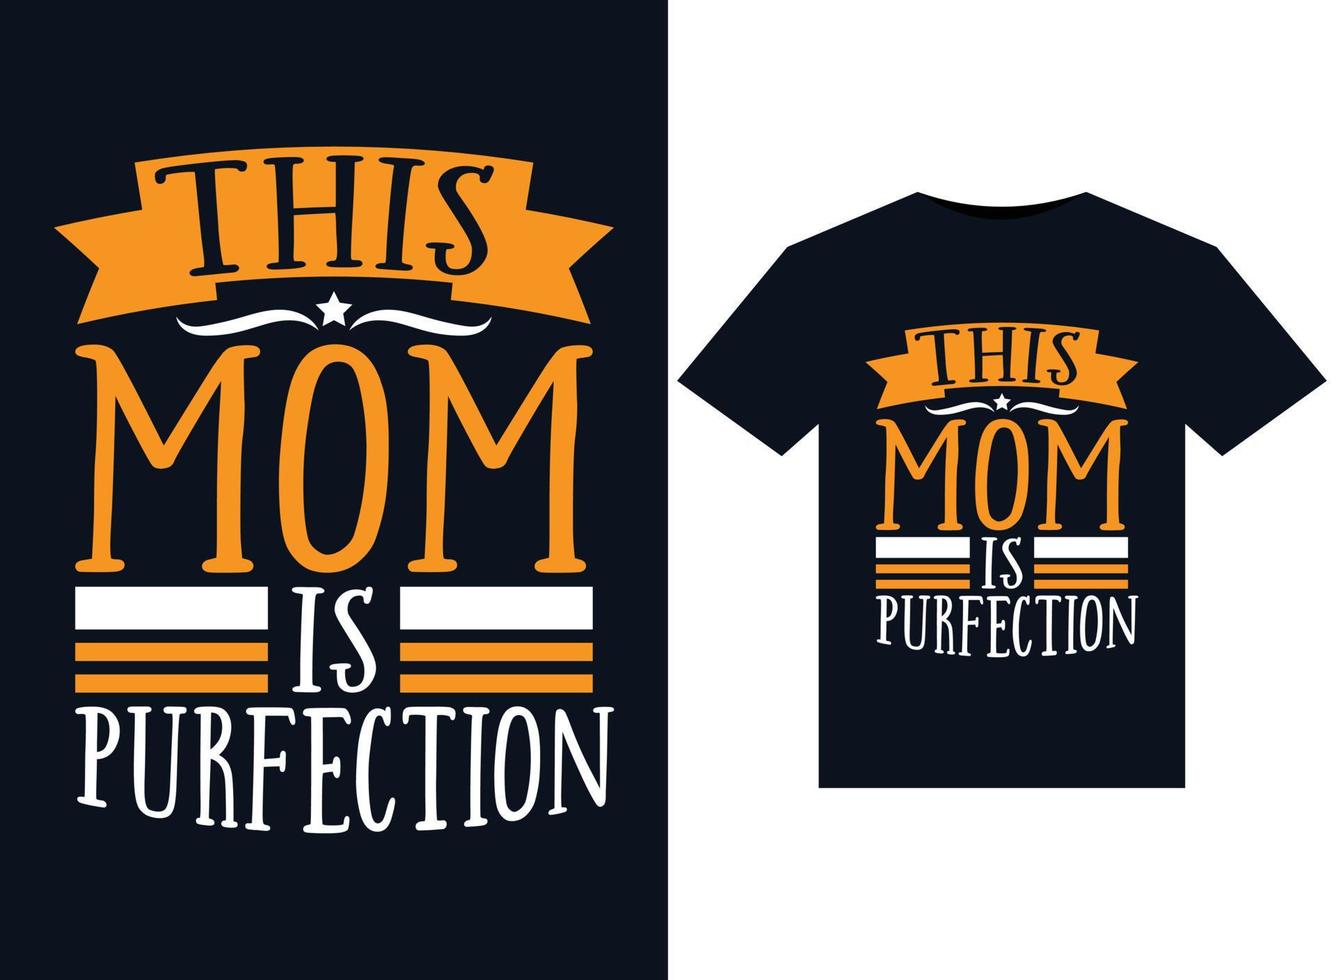 This Mom Is Purfection illustrations for print-ready T-Shirts design vector